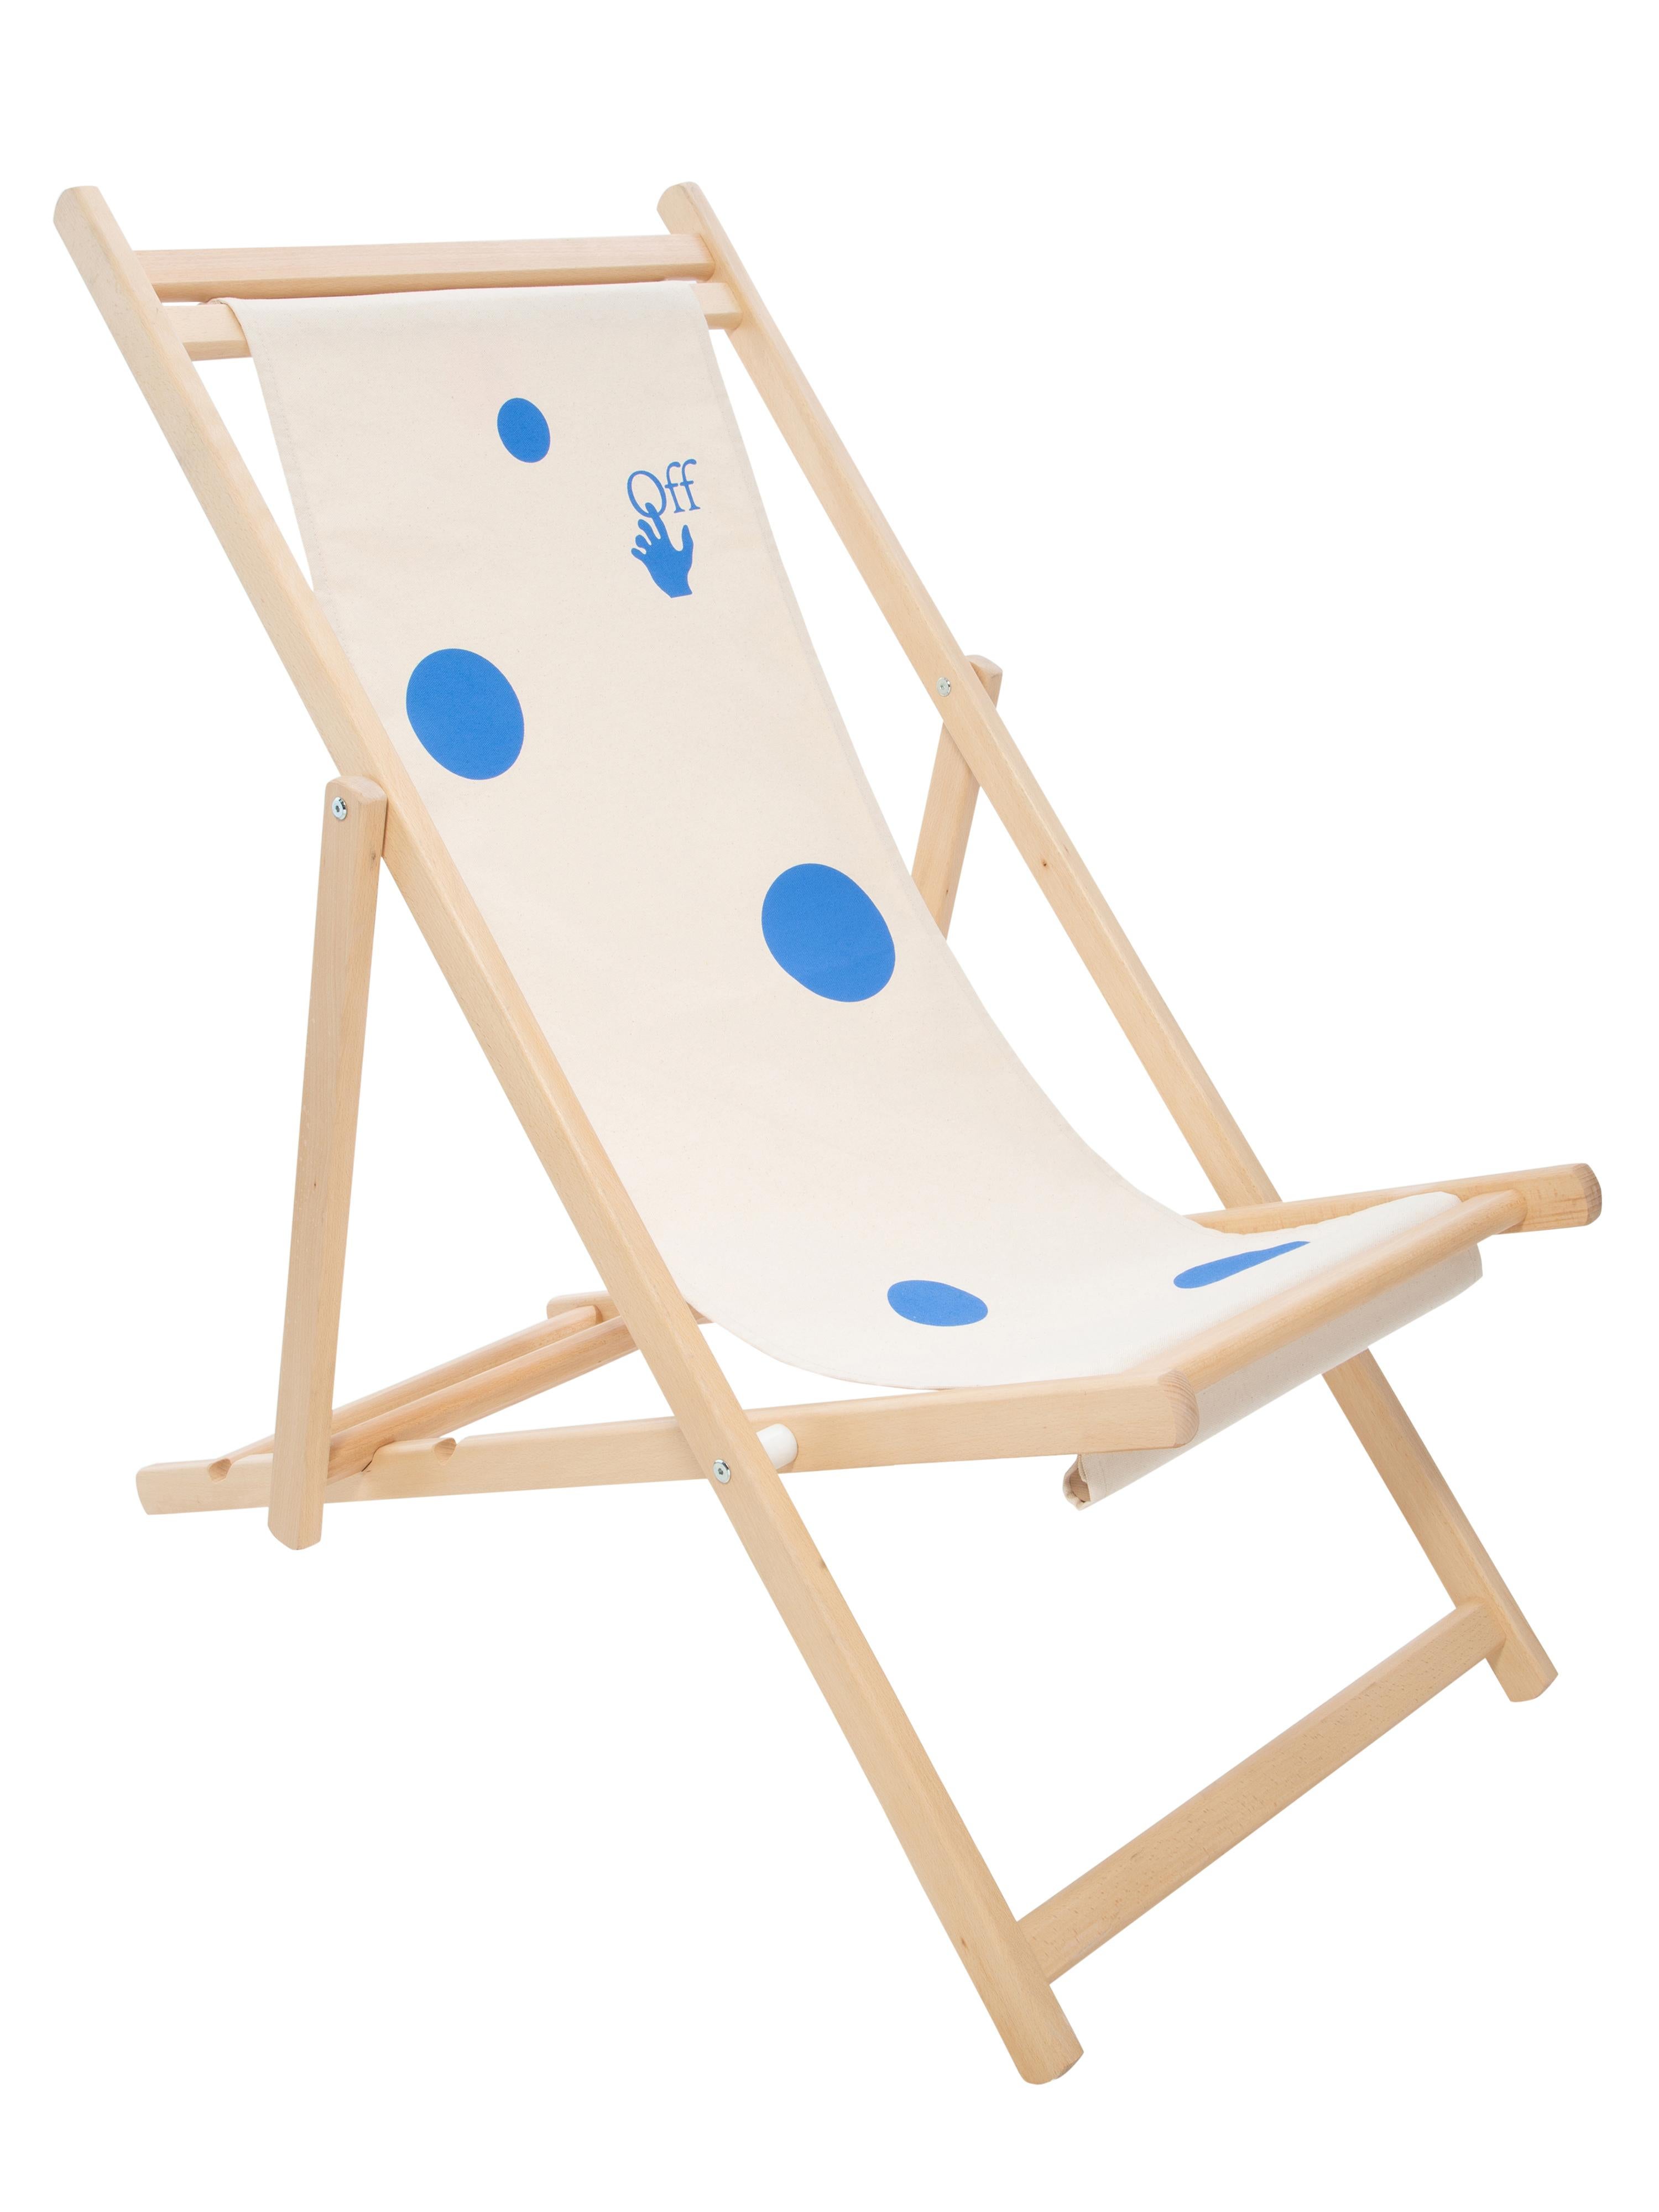 Off-White Deck Chair Wood Ivory Blue For Sale